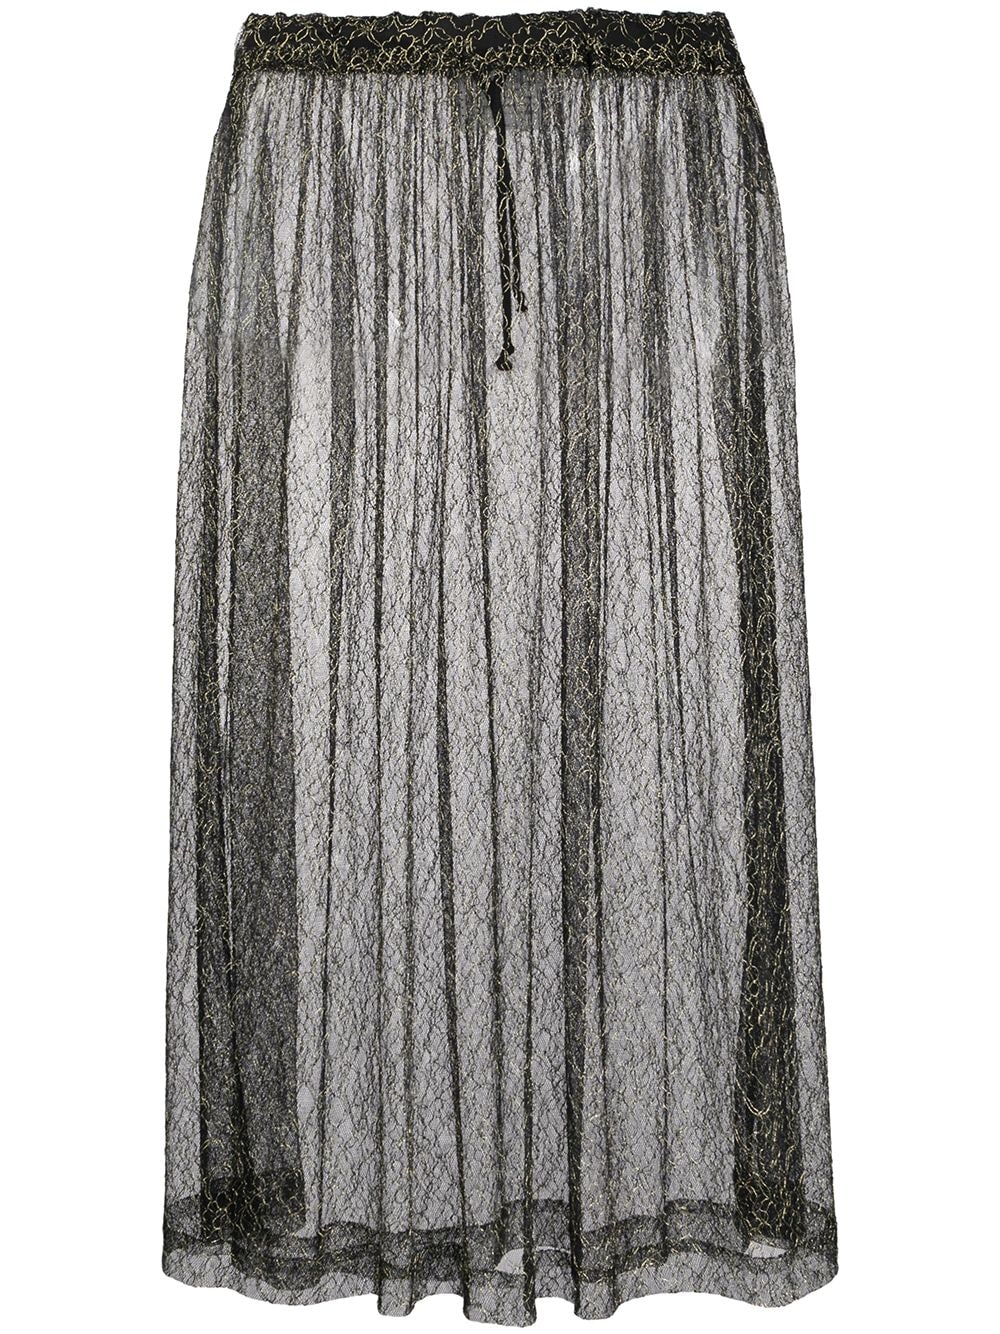 Pre-owned Comme Des Garçons 1997 Metallic Embroidery Sheer Skirt In Black